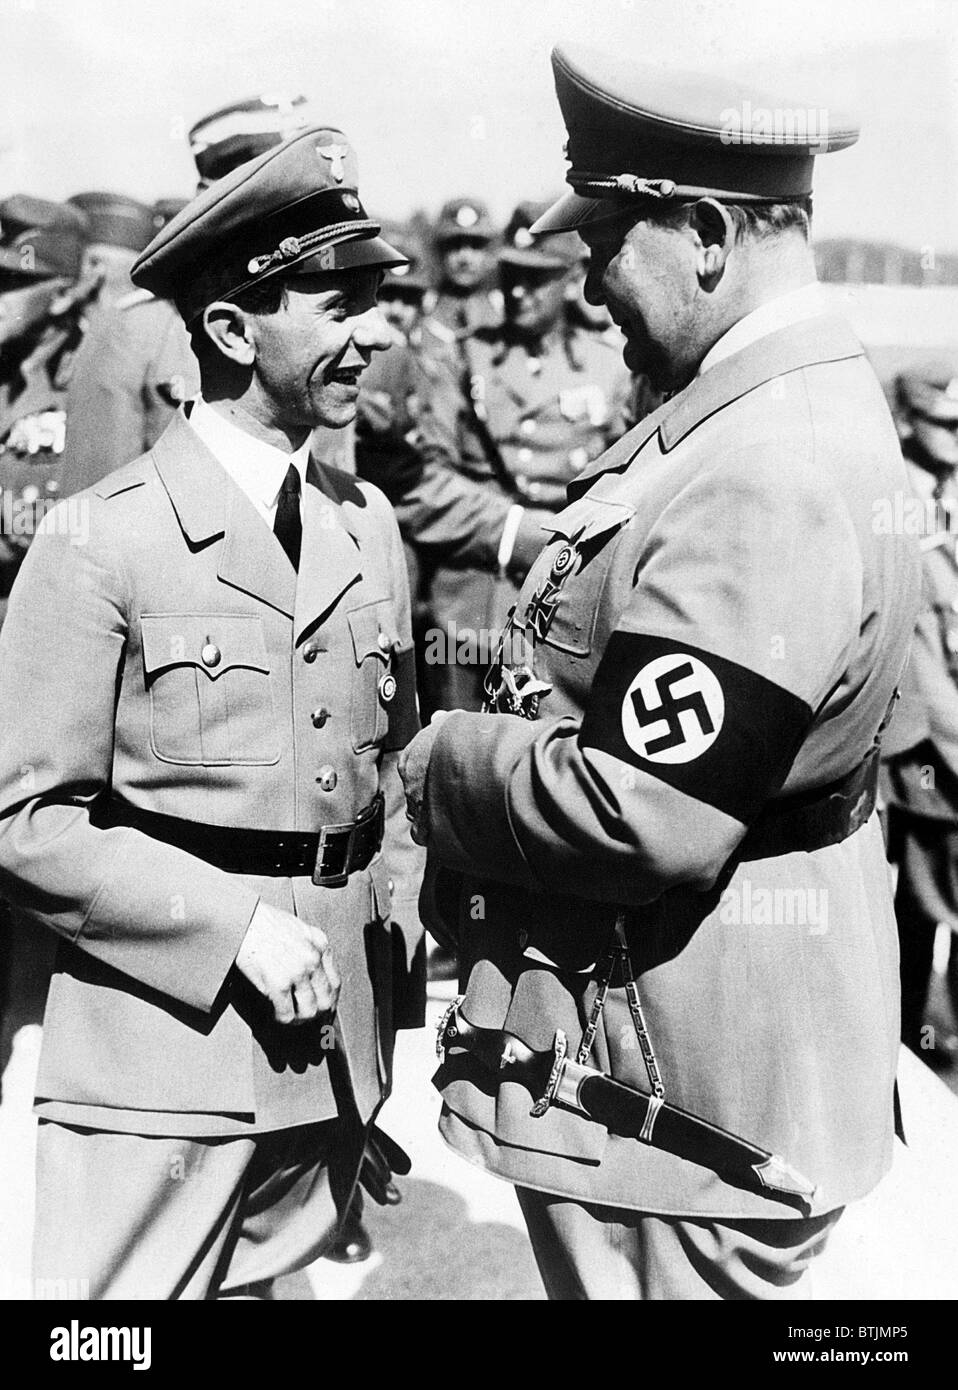 Two of Adolf Hitler's top aides, Dr. Joseph Goebbels, Reich propaganda minister, and General Hermann Goering, air minister atten Stock Photo